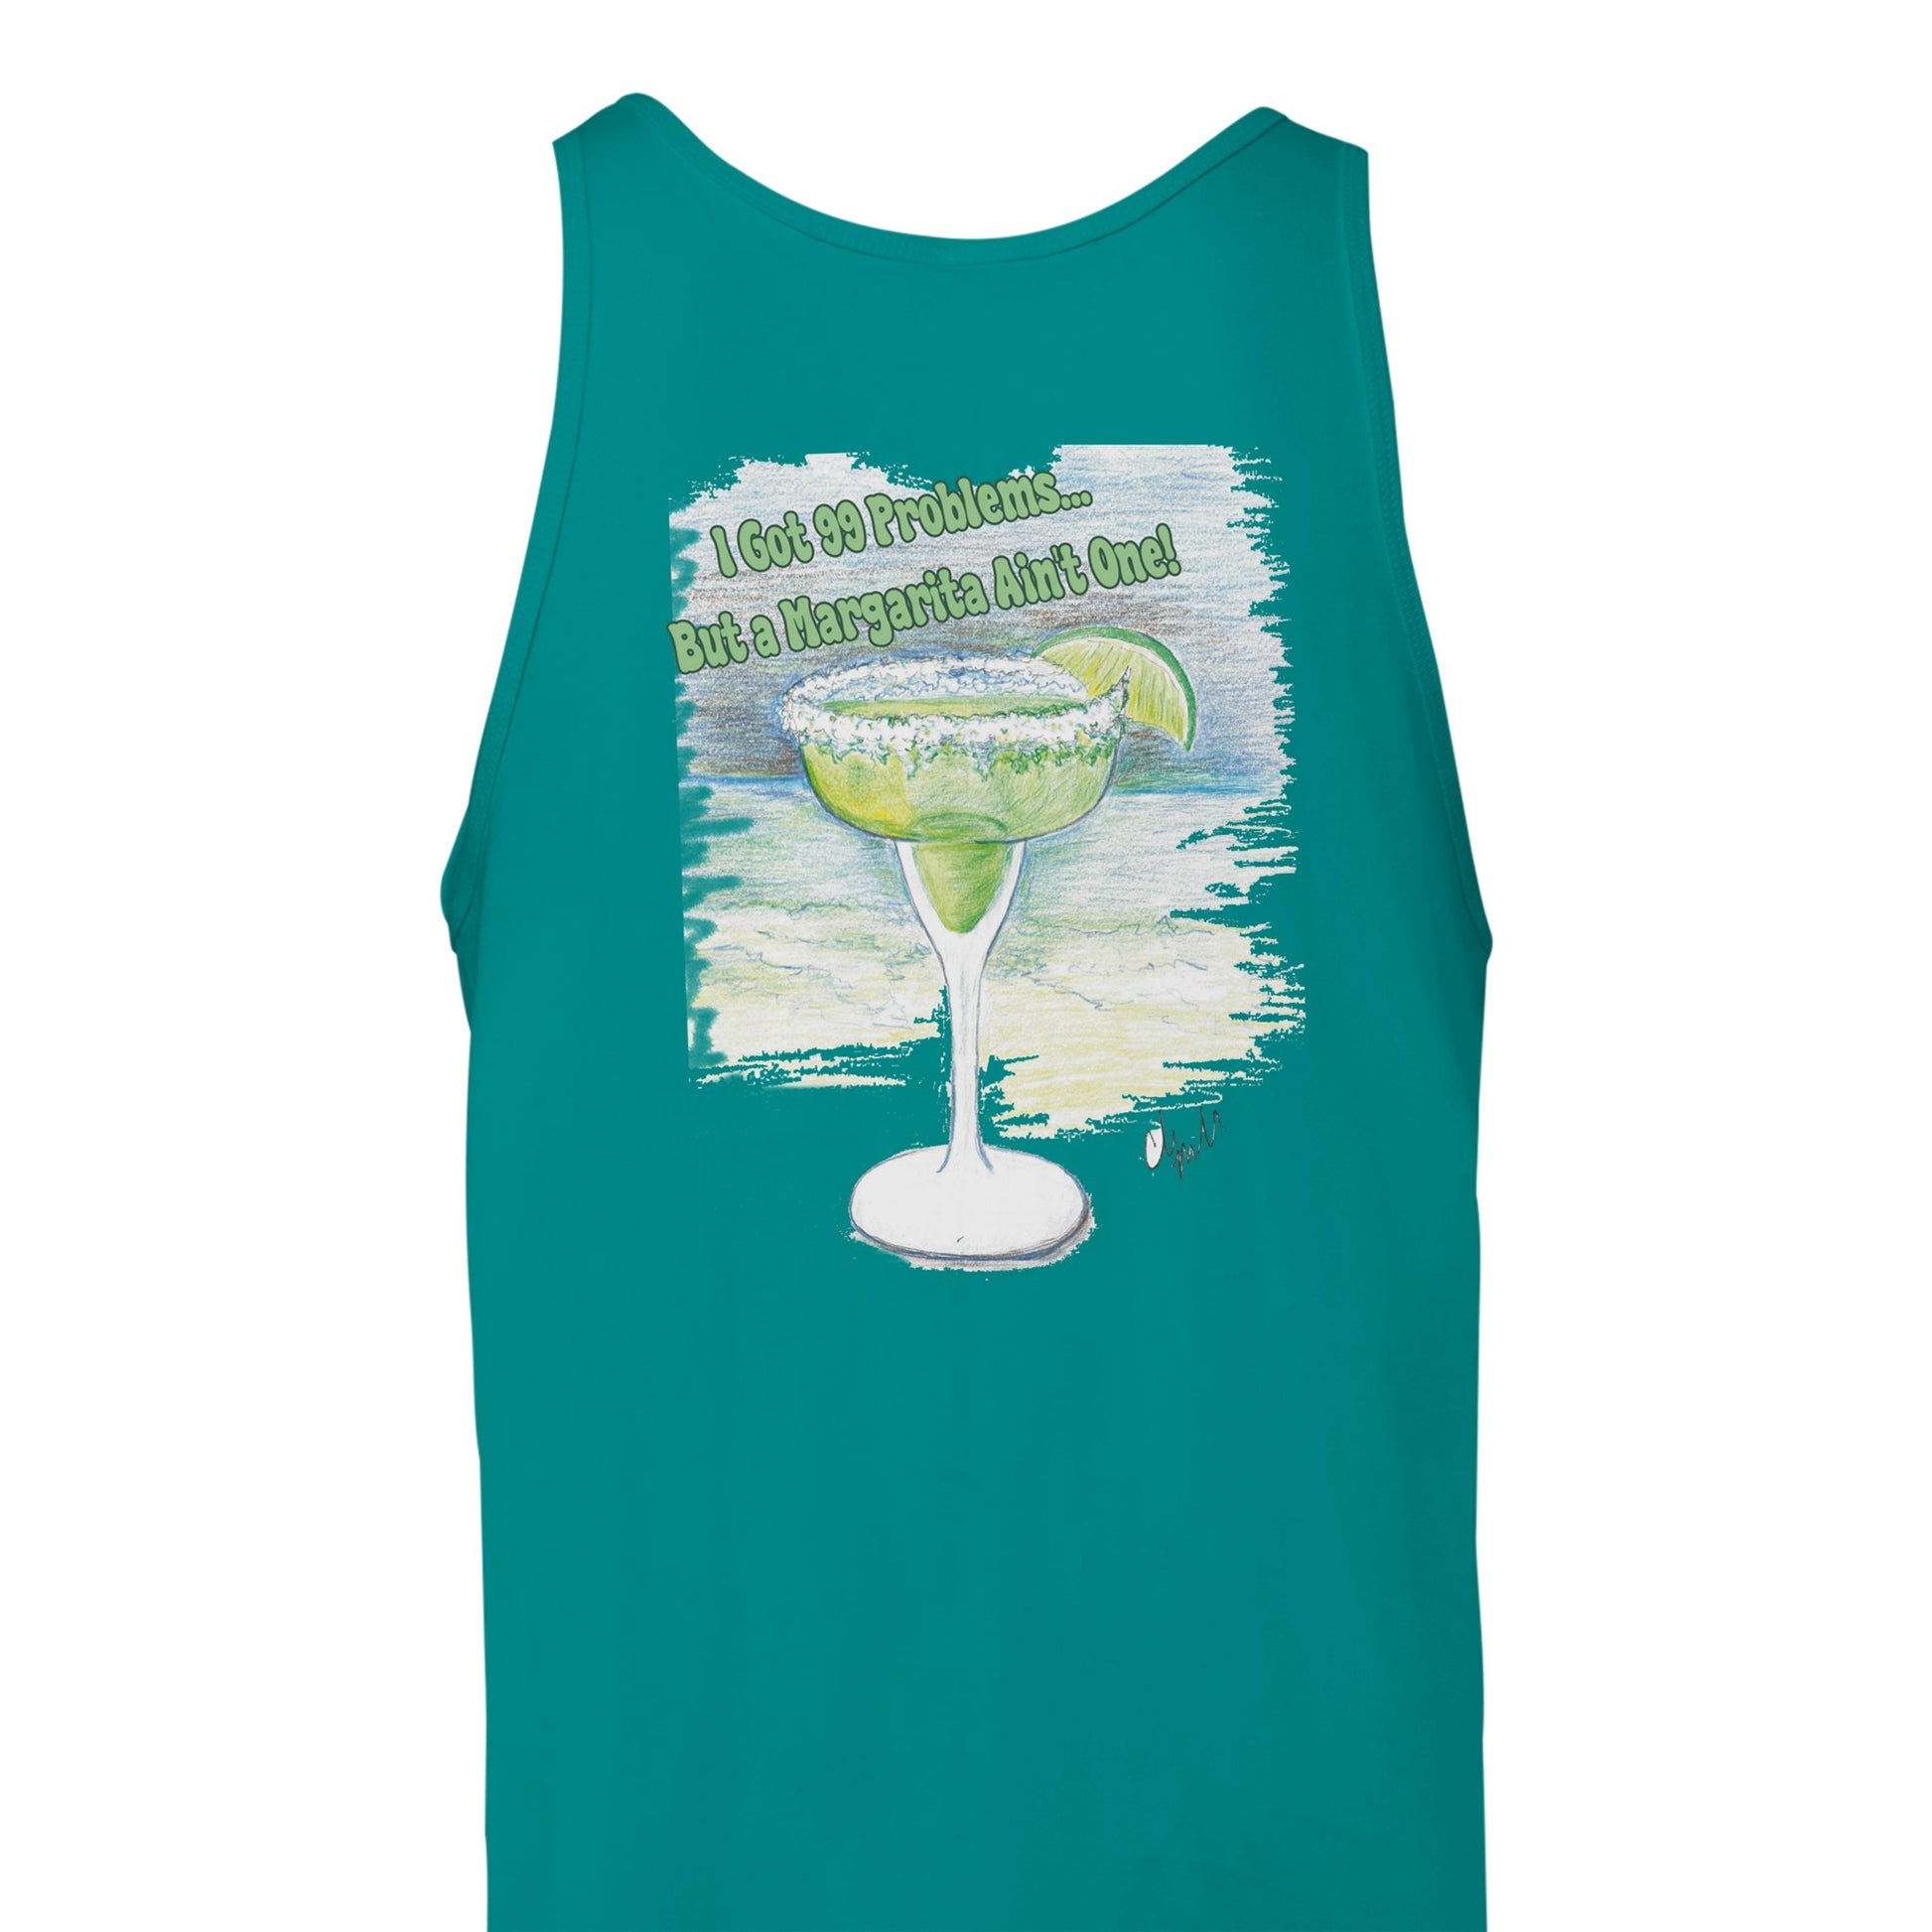 A teal  Premium Unisex Tank Top with original artwork and motto I Got 99 Problems But a Margarita Ain't One on back and WhatYa Say logo on front from combed and ring-spun cotton back view.